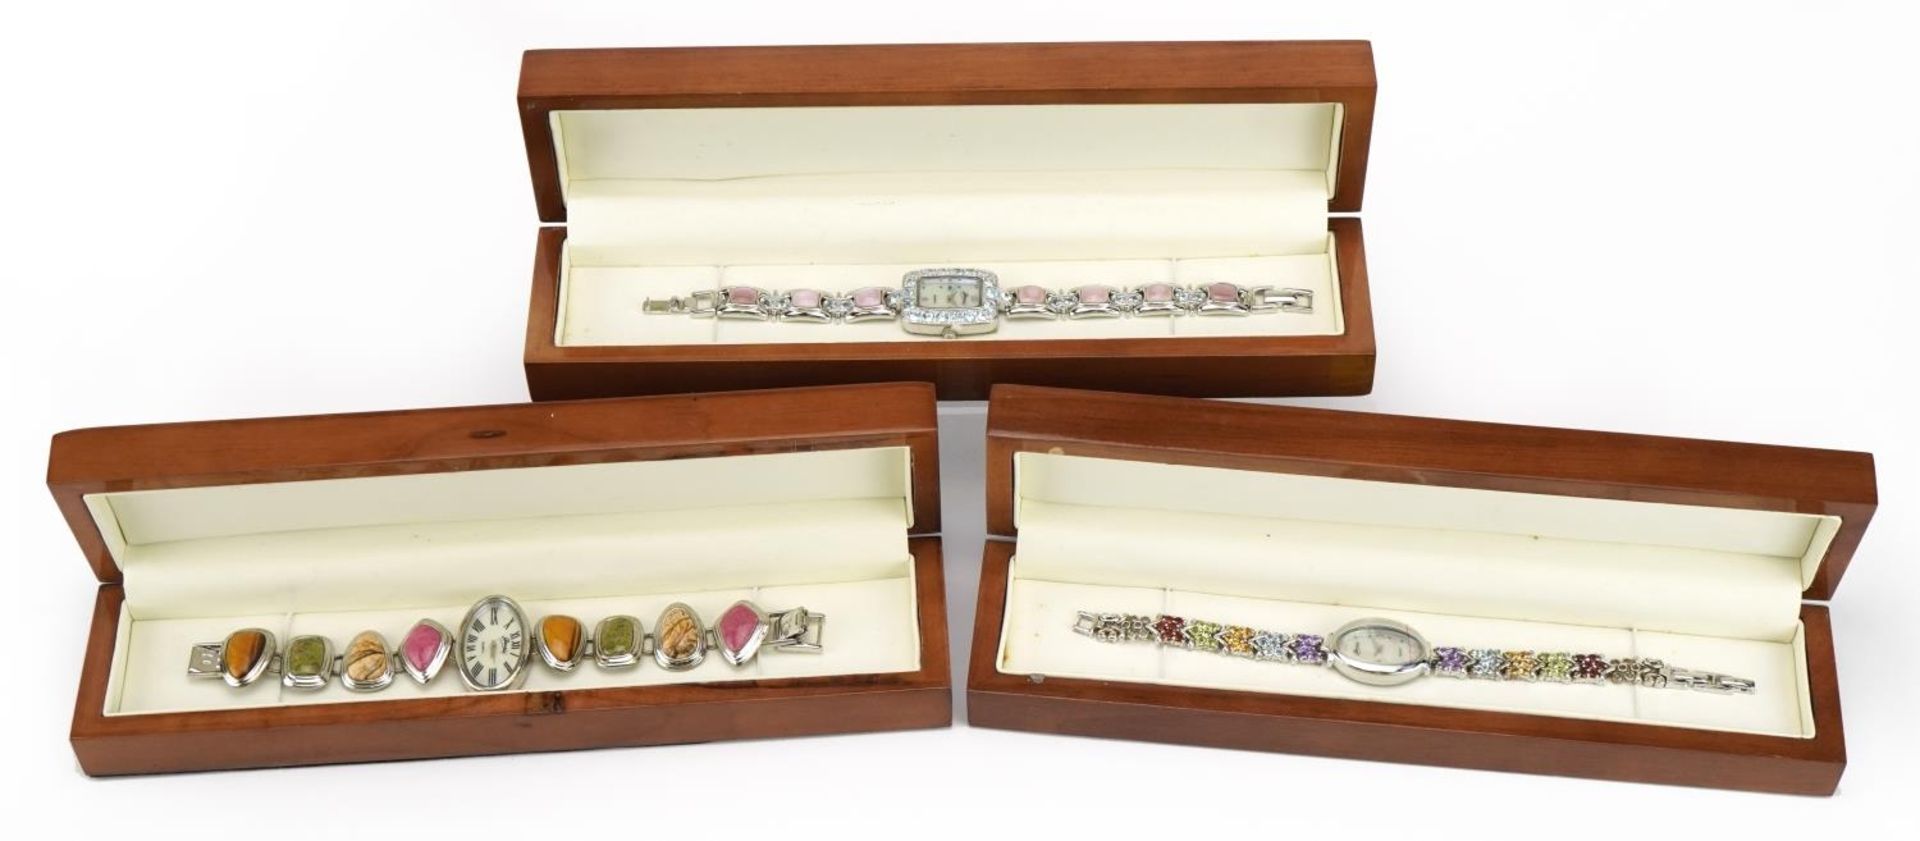 Three as new ladies Gems TV silver gem set and hardstone wristwatches, each with box - Image 5 of 6